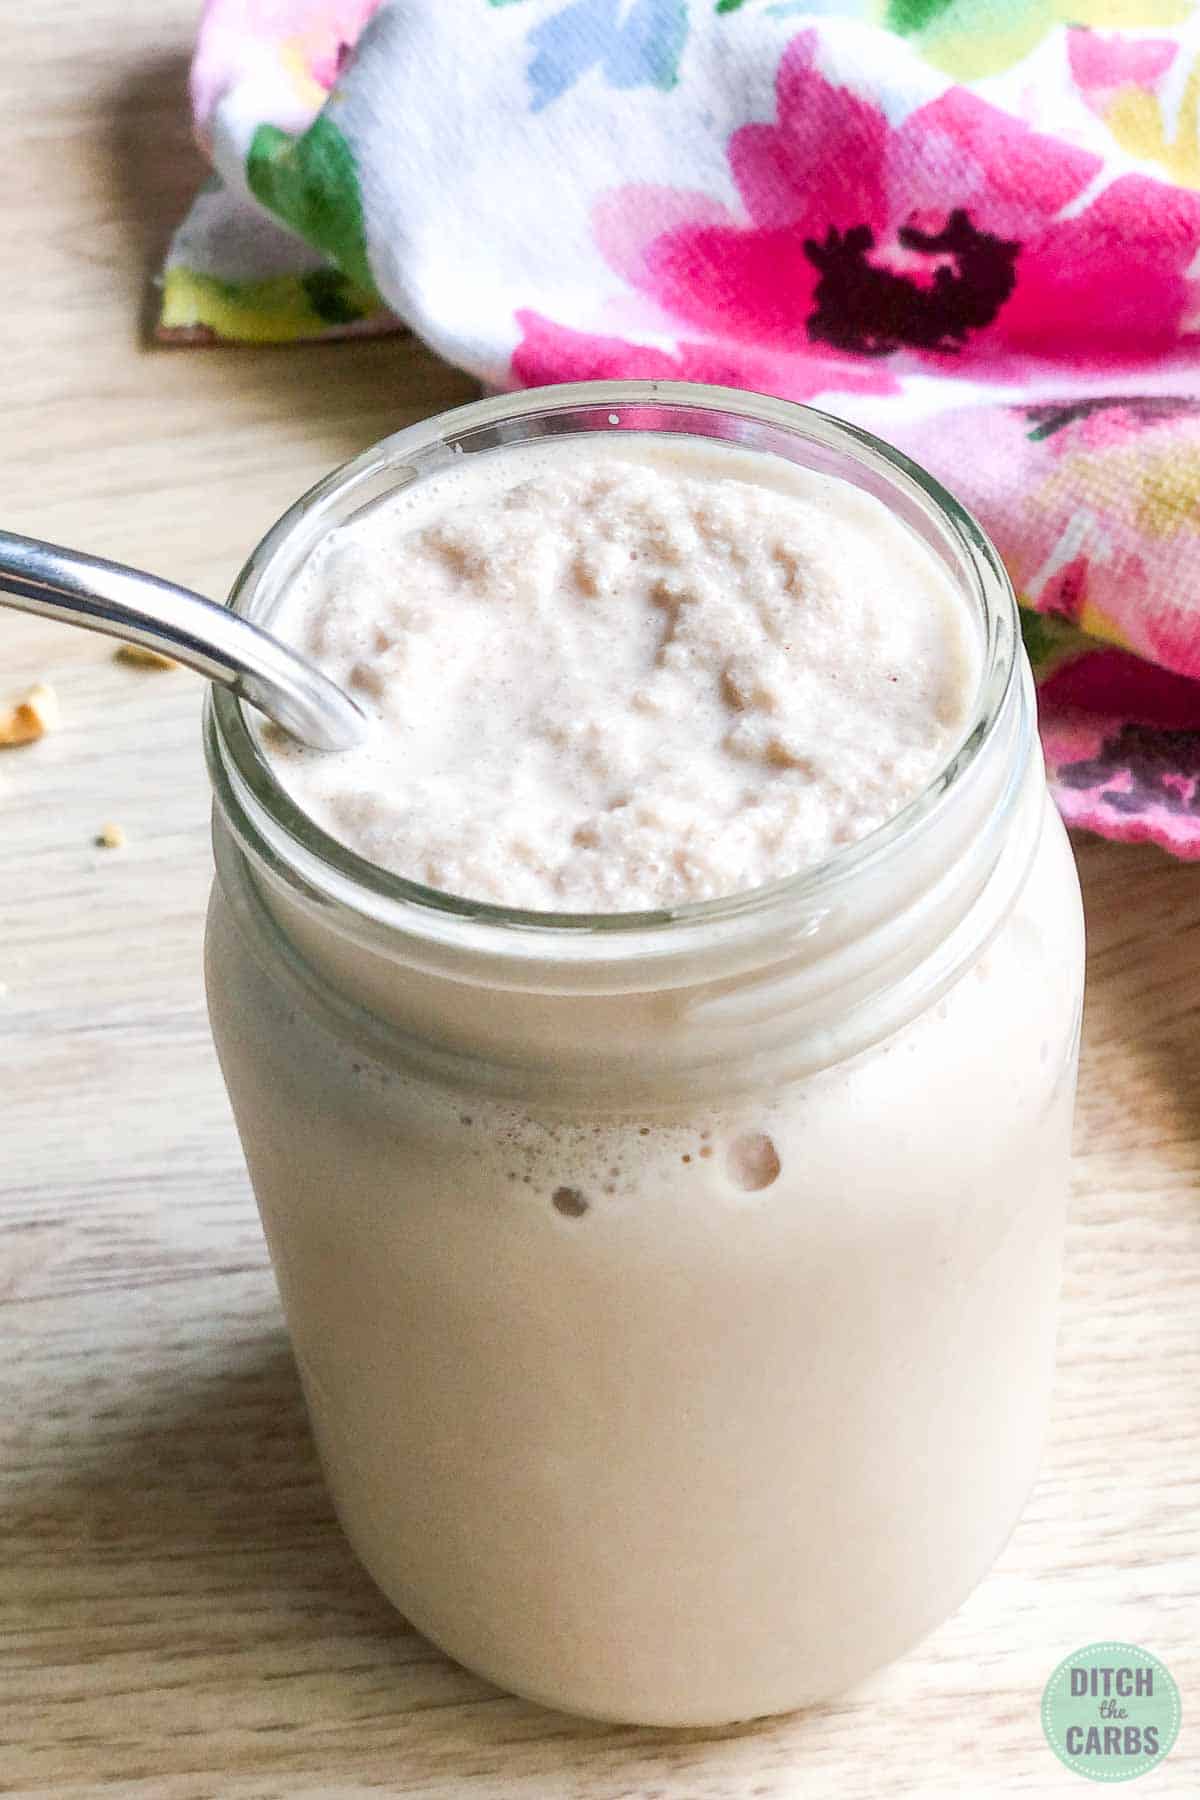 The keto chocolate peanut butter has been poured into a clear glass jar with a metal straw added to it.